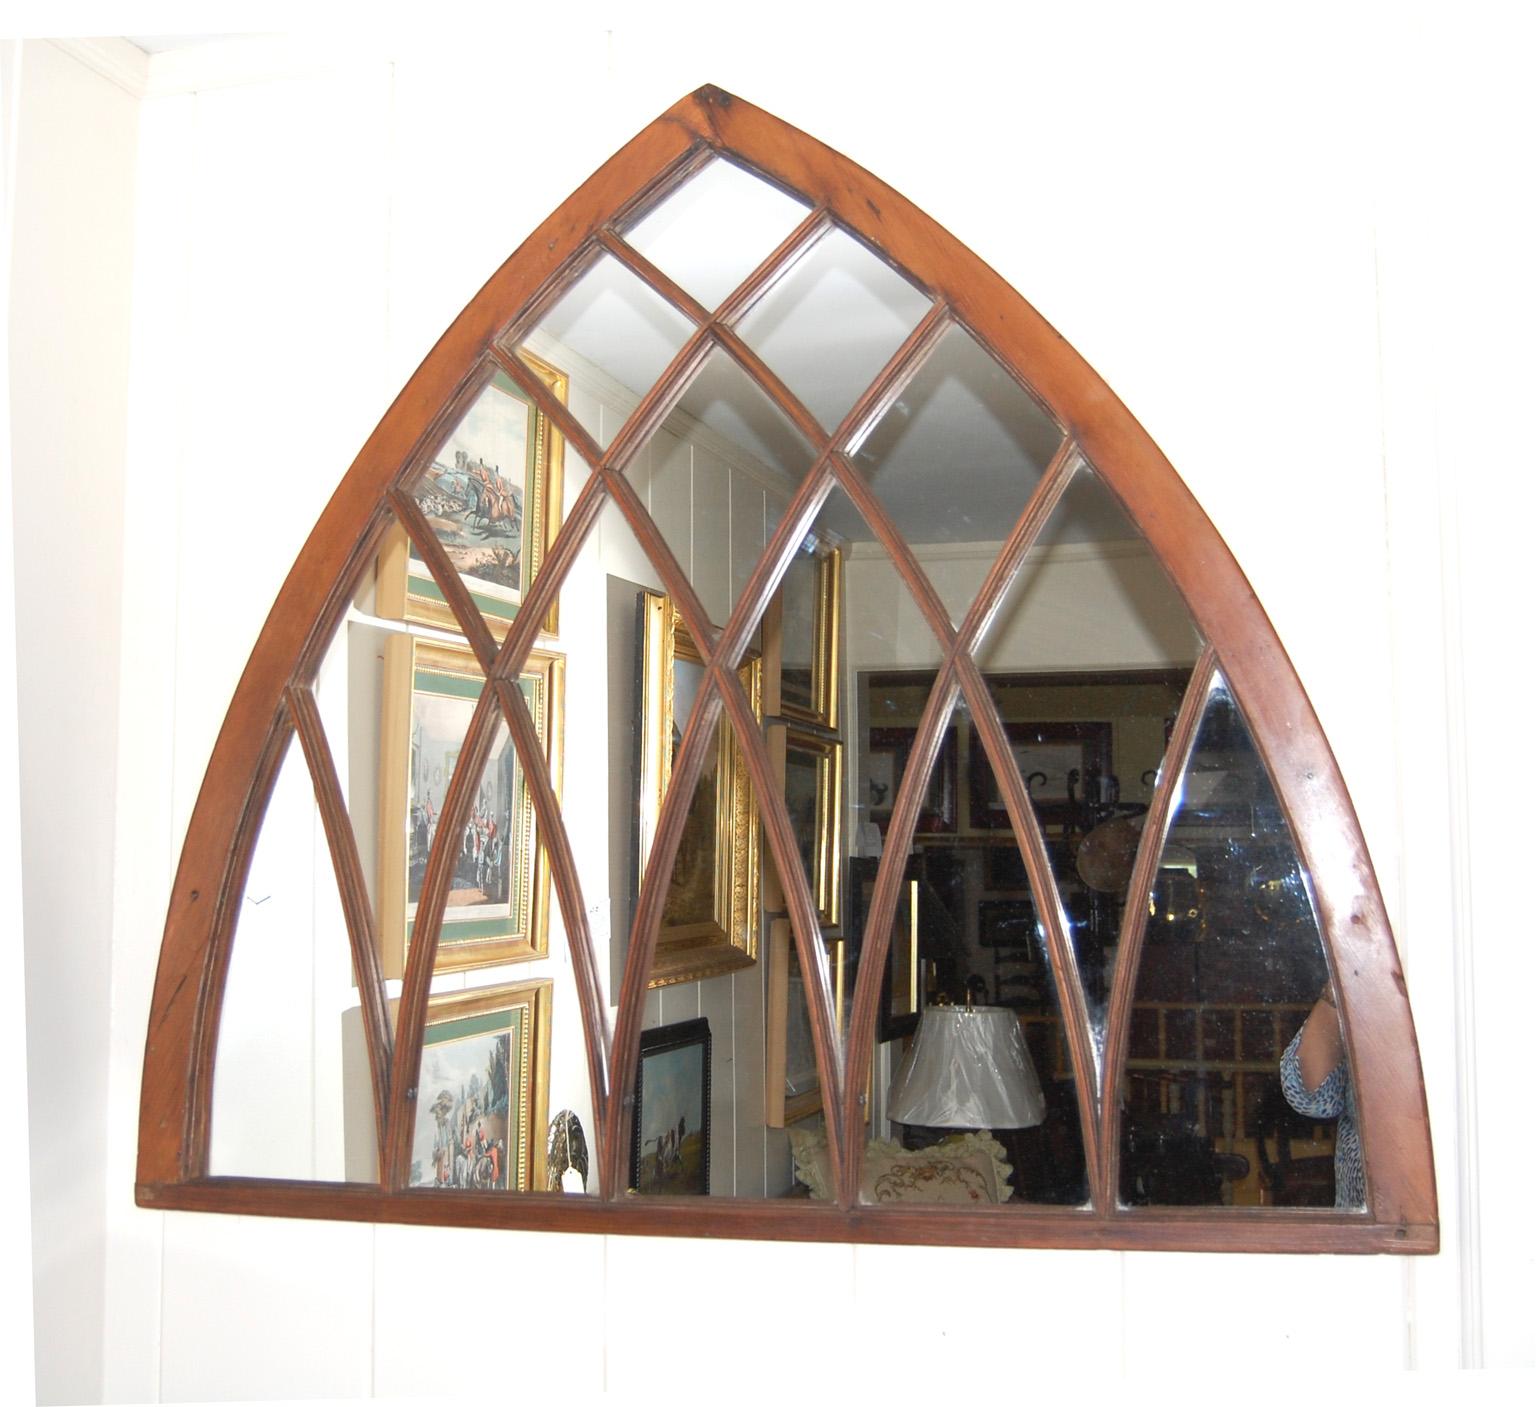 
 American 19th century pine large neo gothic arched window mirror with molded arched interlocking muntins.  This beautifully shaped window has had the window glass replaced with mirror, and the paint removed. The pine has a soft wax finish.     45